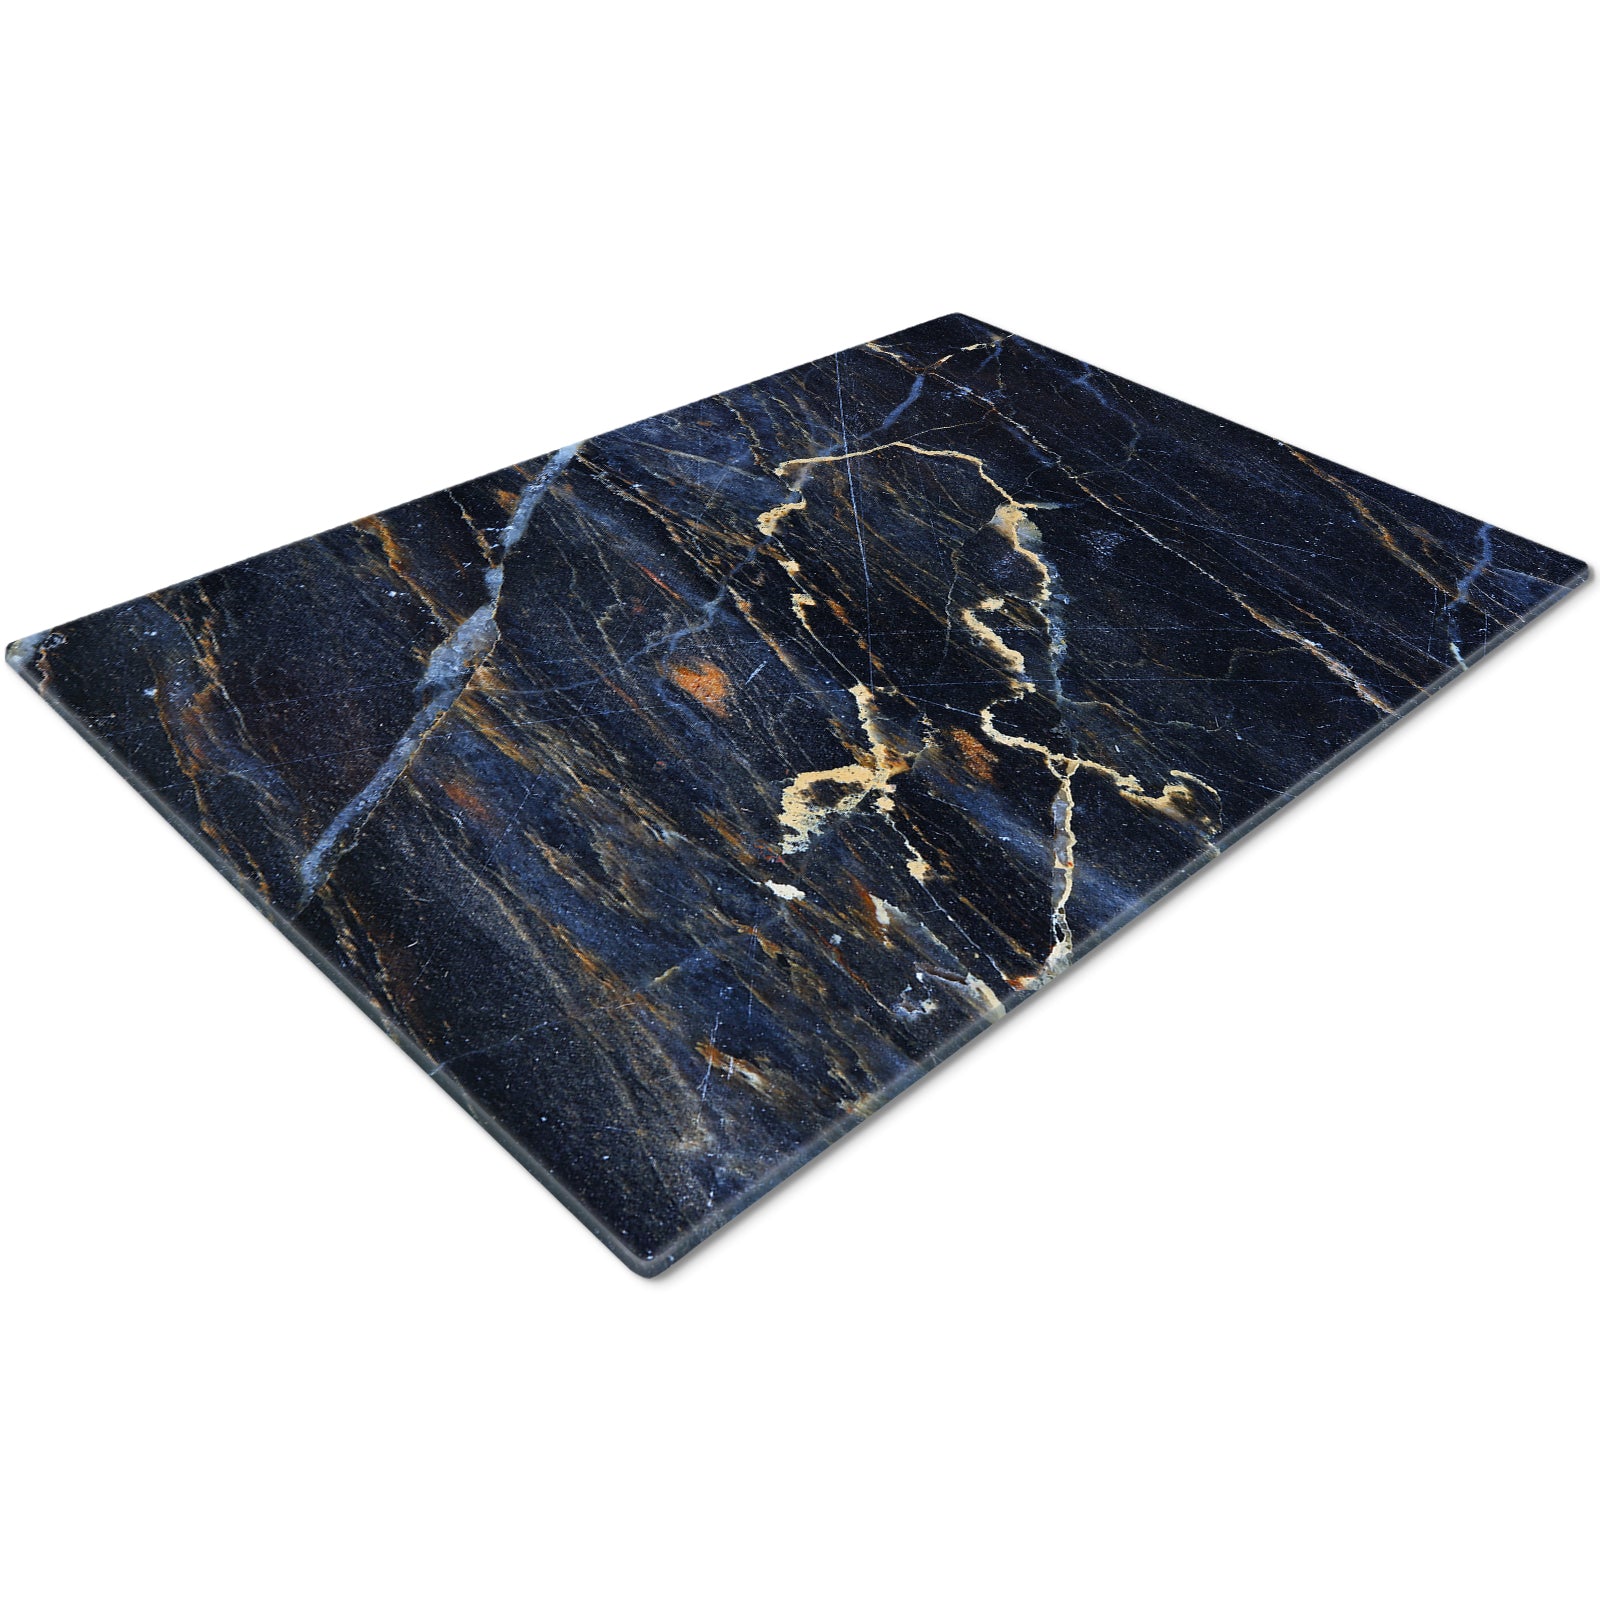 Glass Chopping Board For Kitchen 